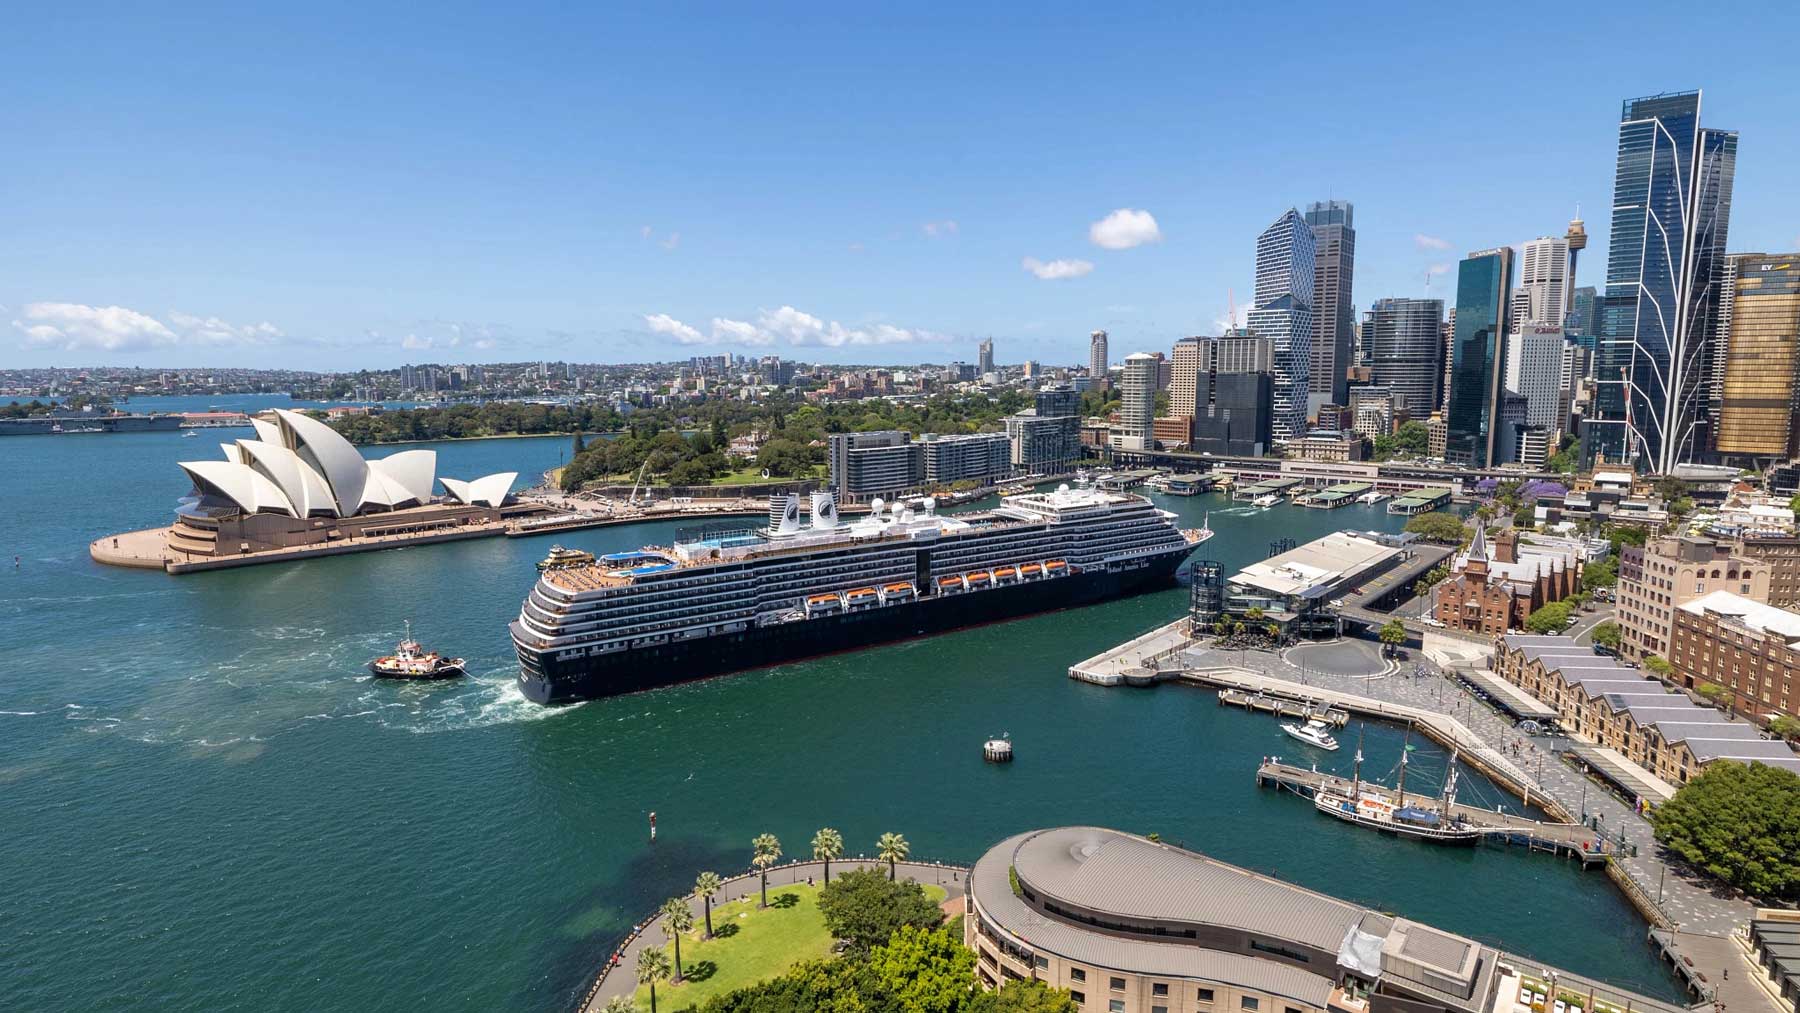 Australia, New Zealand, and South Pacific Collectors' Voyages are ideal for intrepid travelers looking for a longer cruise experience.